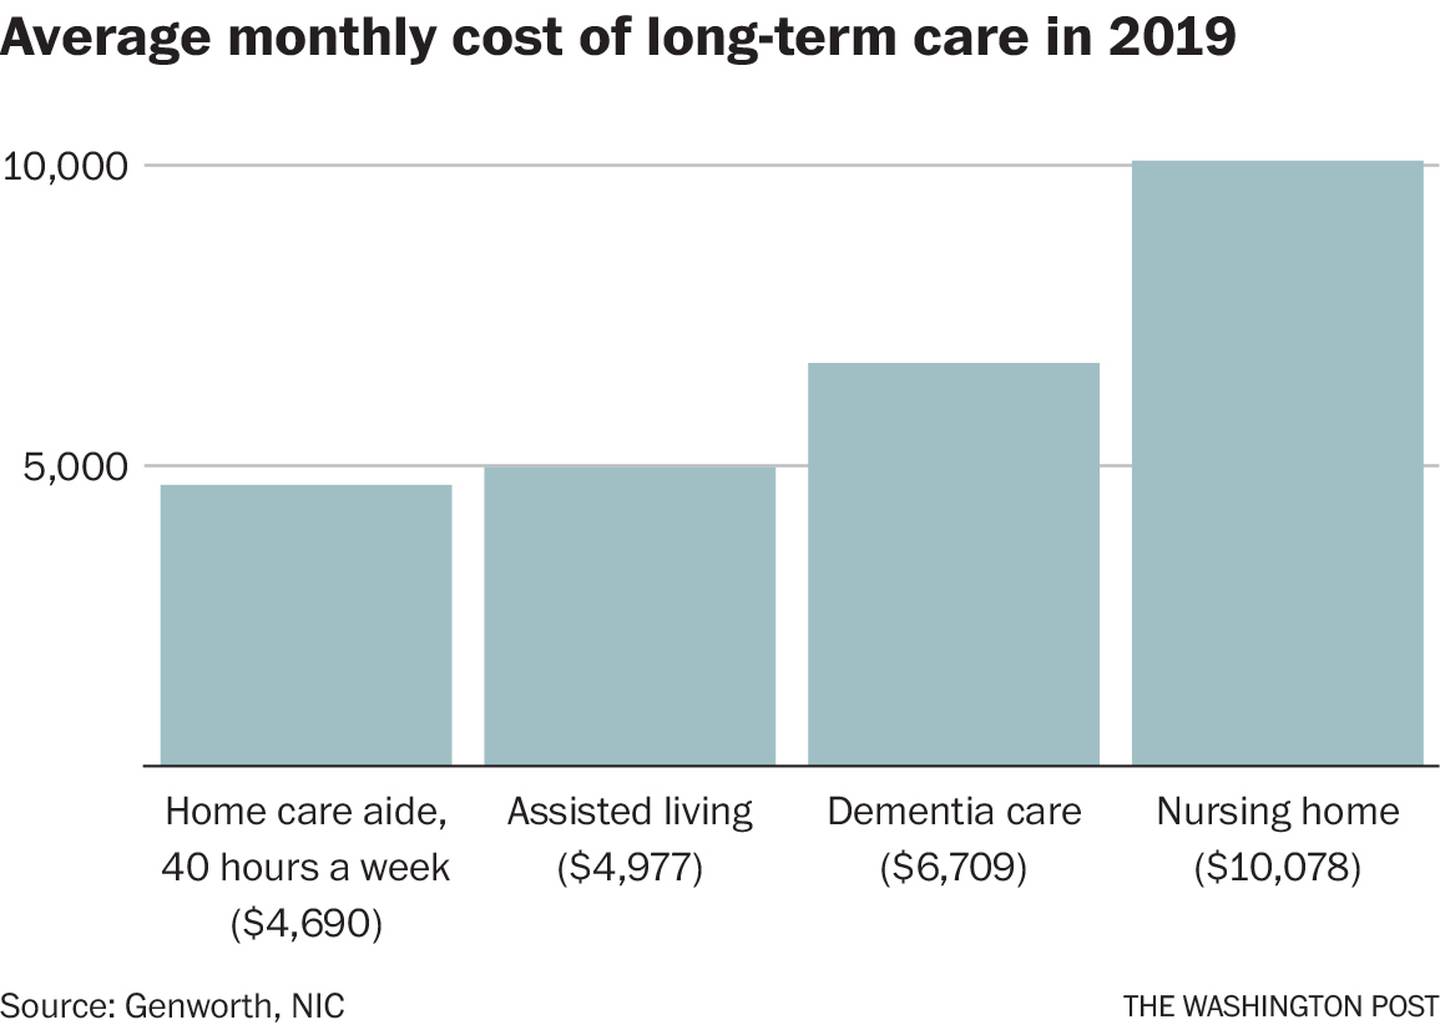 Average monthly cost of long-term health care baby boomers medical costs Washington Post graphic chart senior